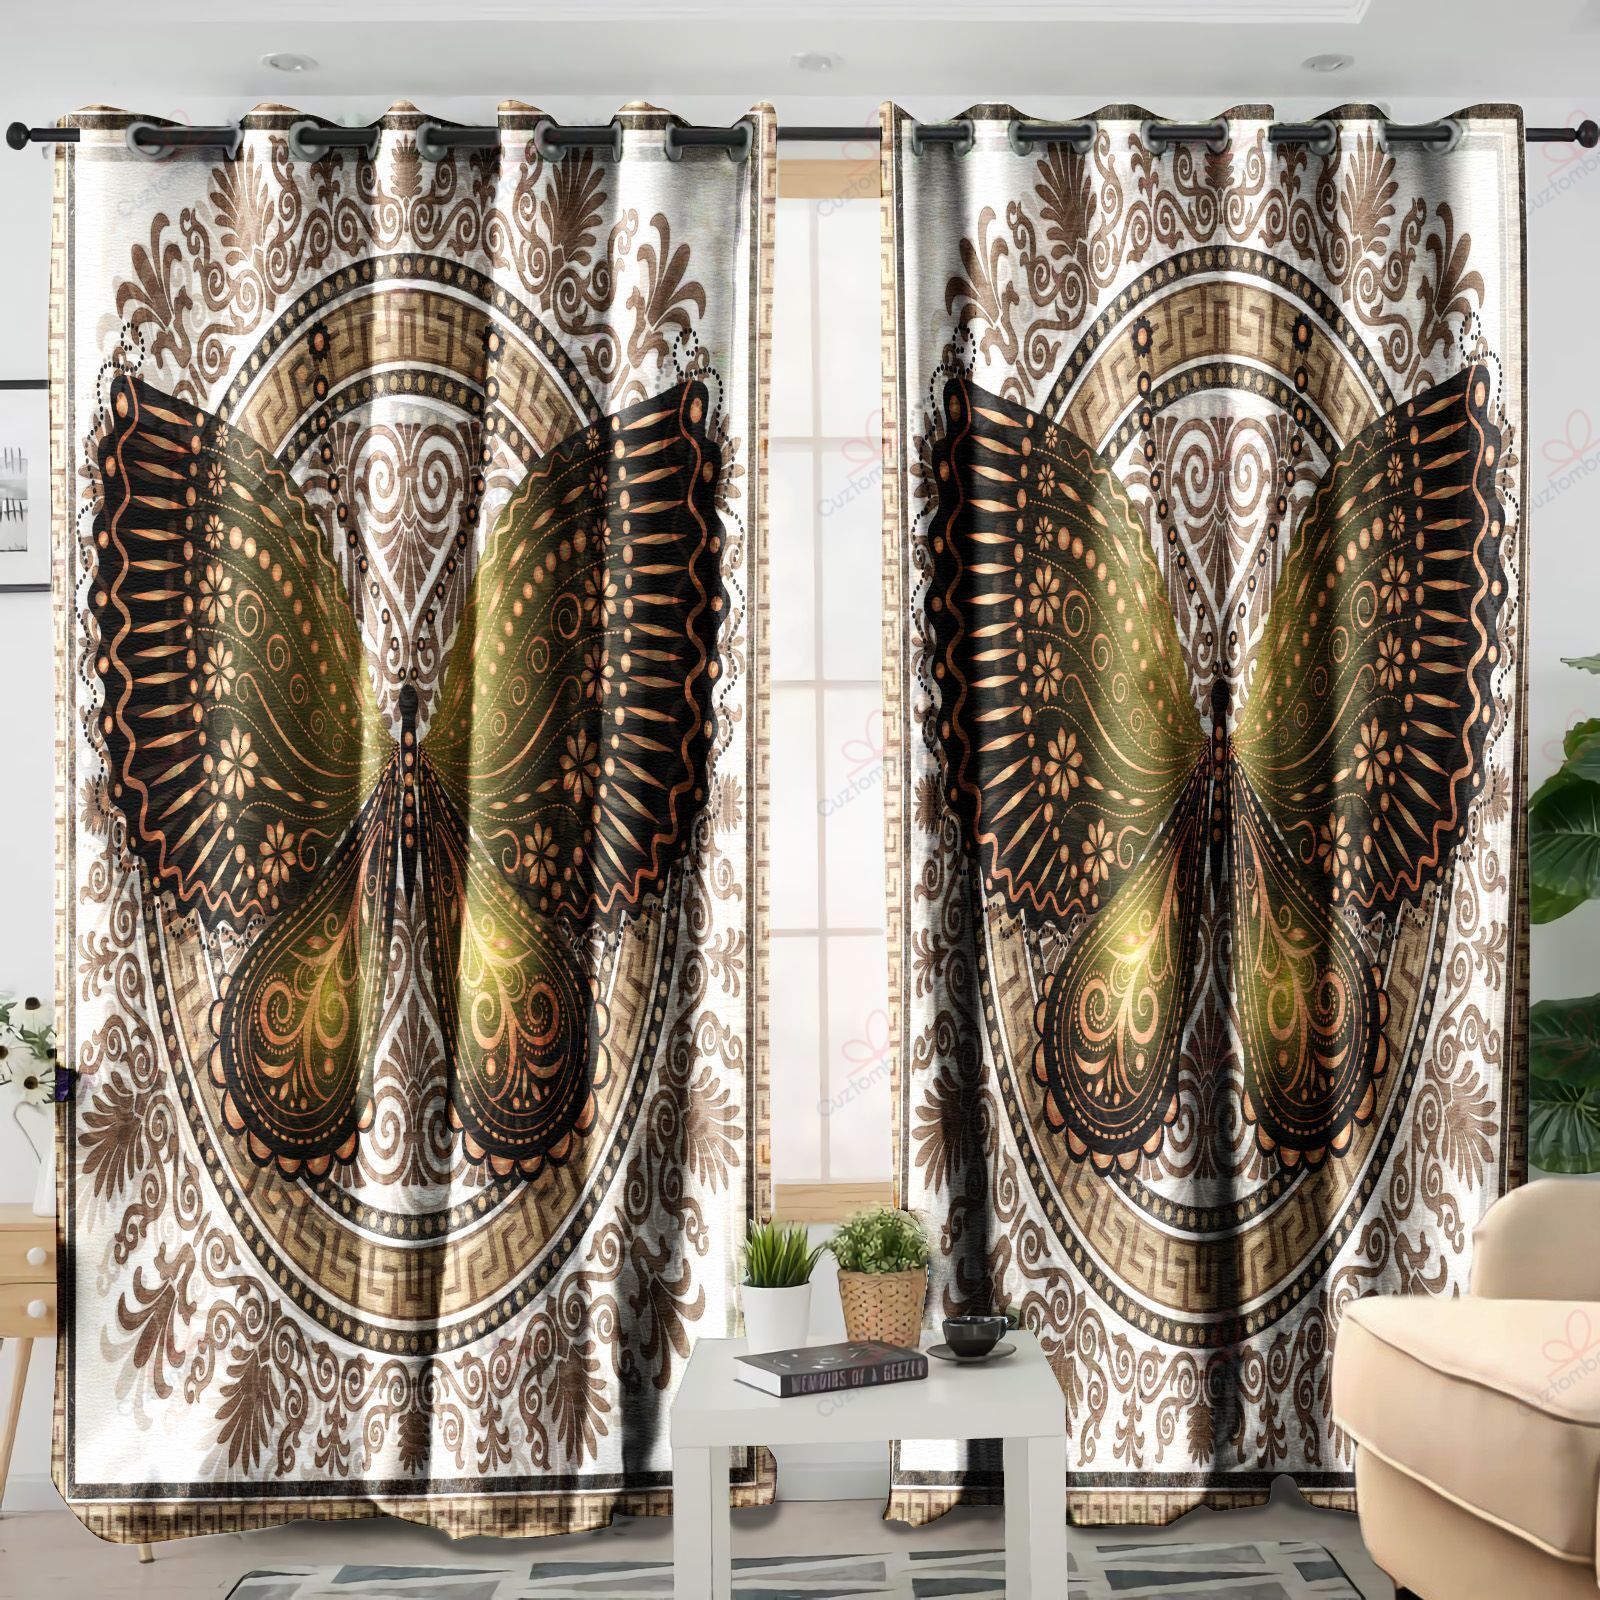 Butterfly Pattern Vintage Printed Window Curtain Home Decor